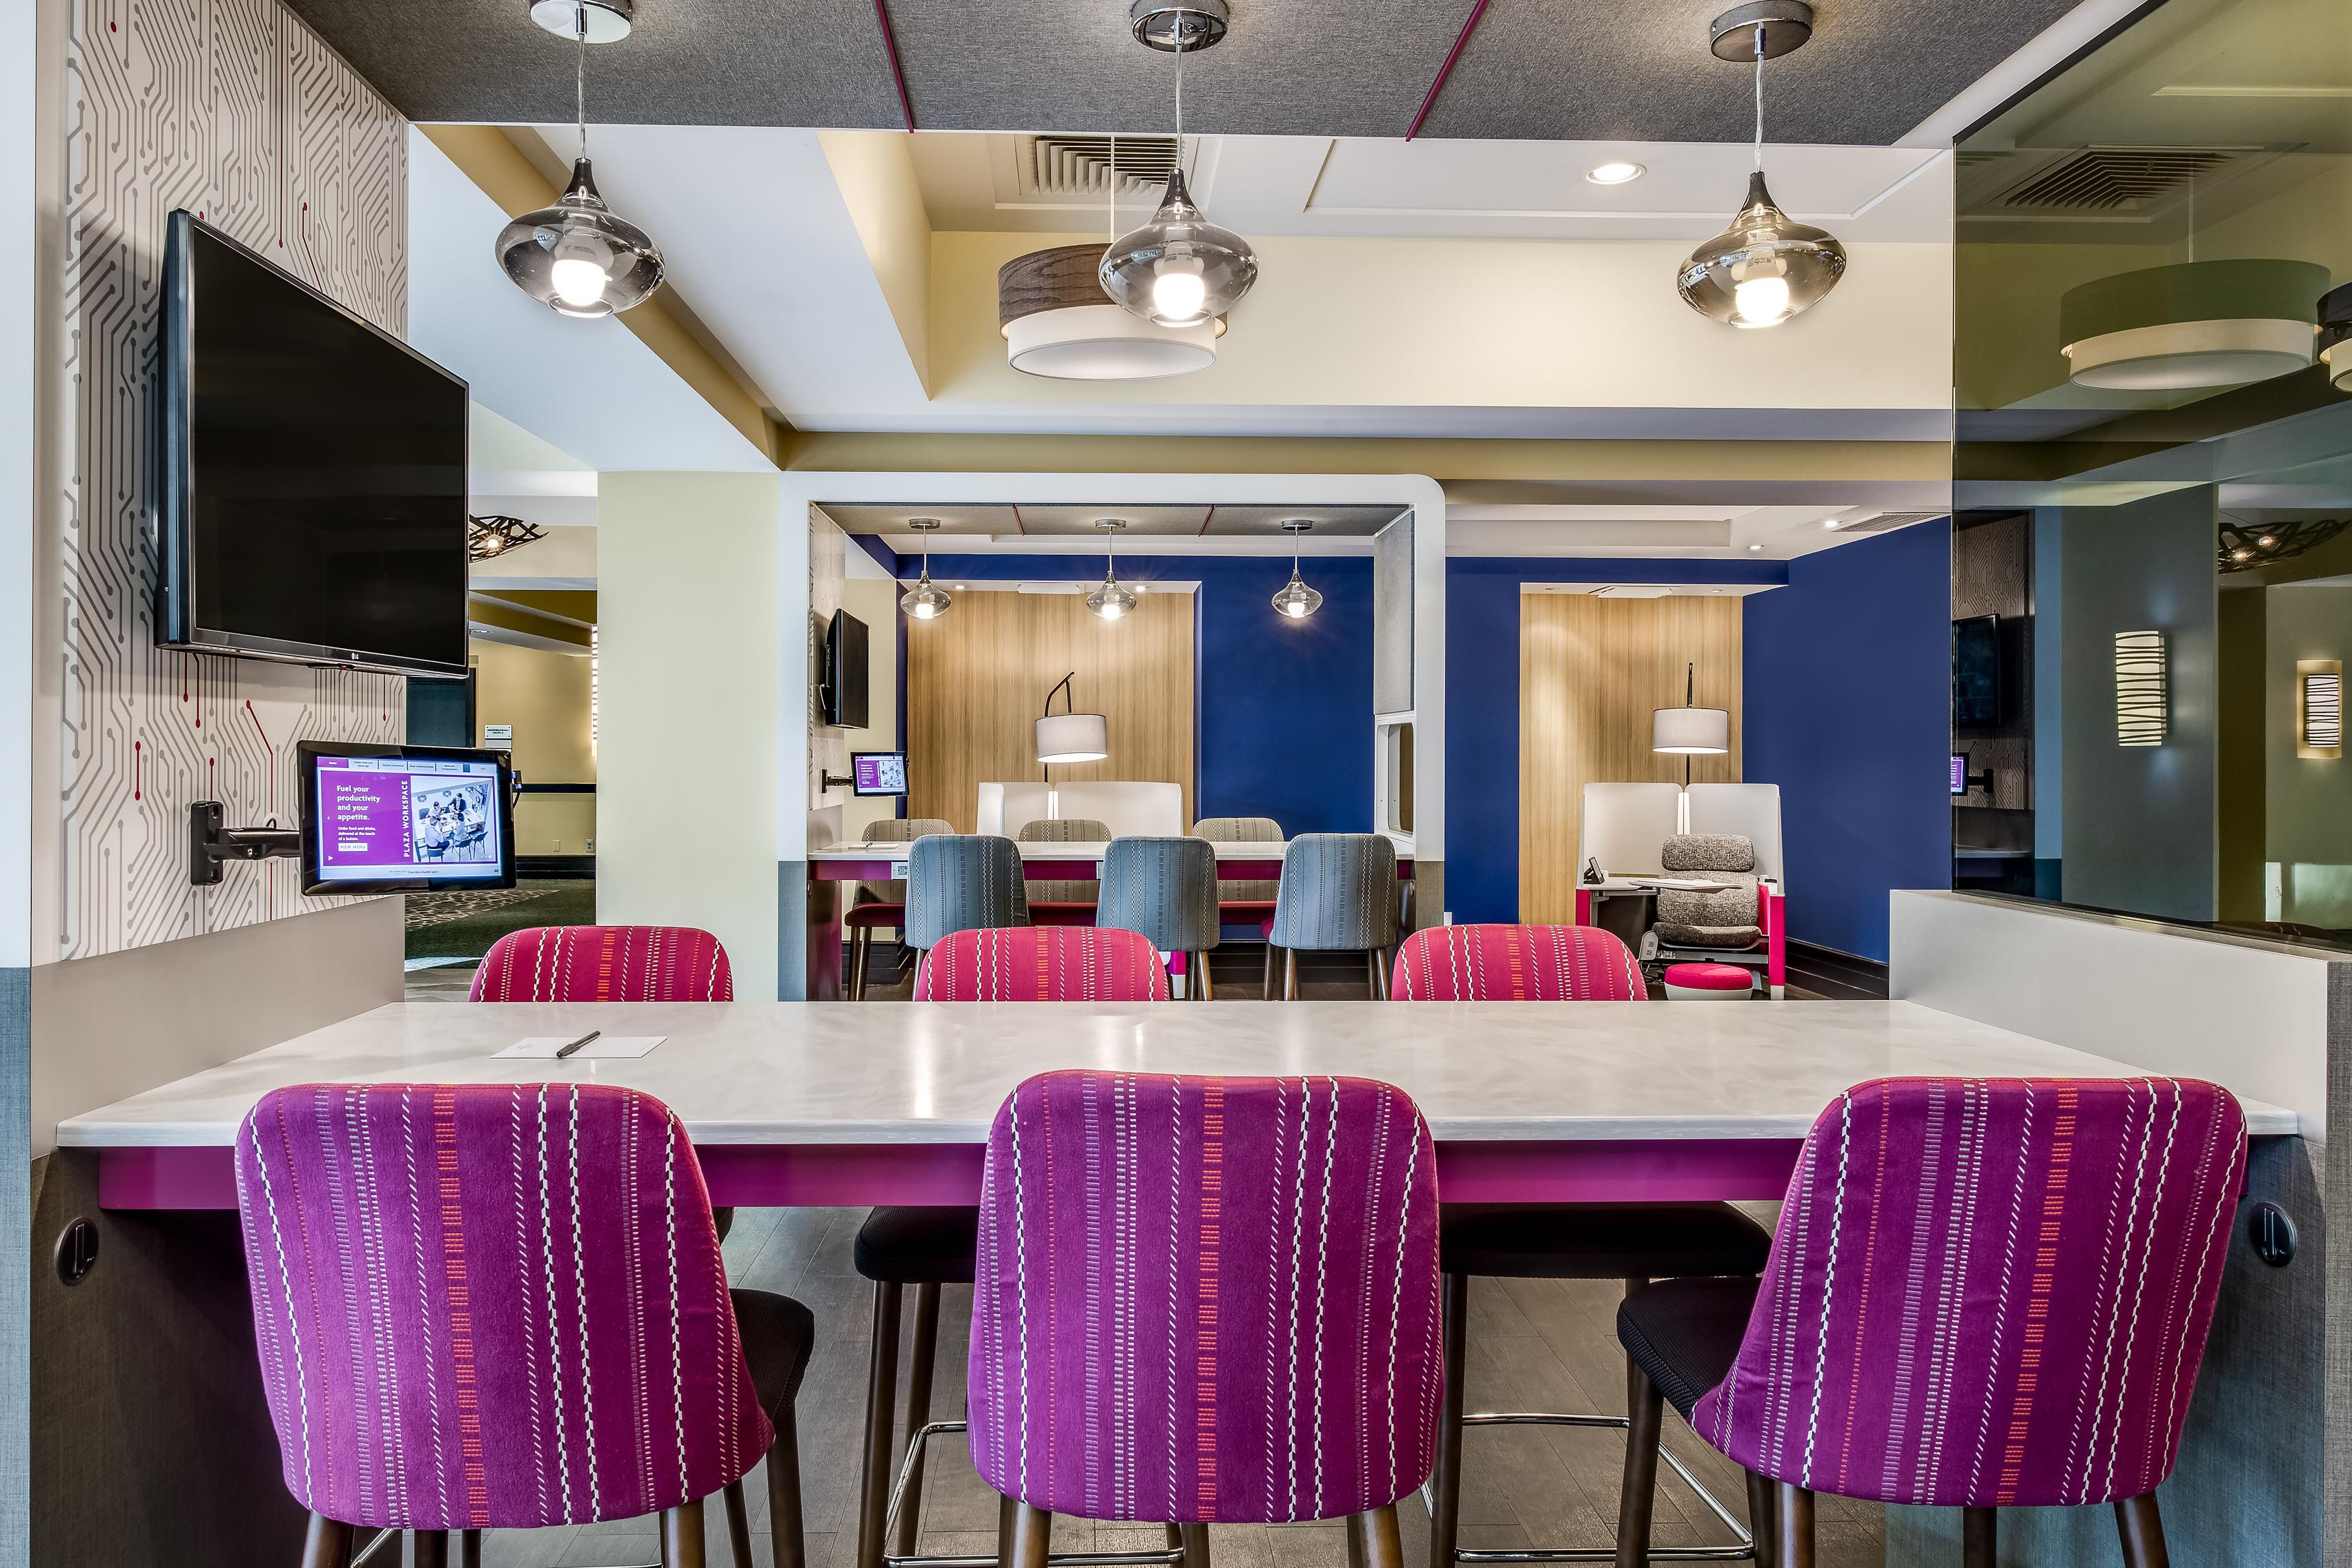 Newly renovated business stations offer space to create success.